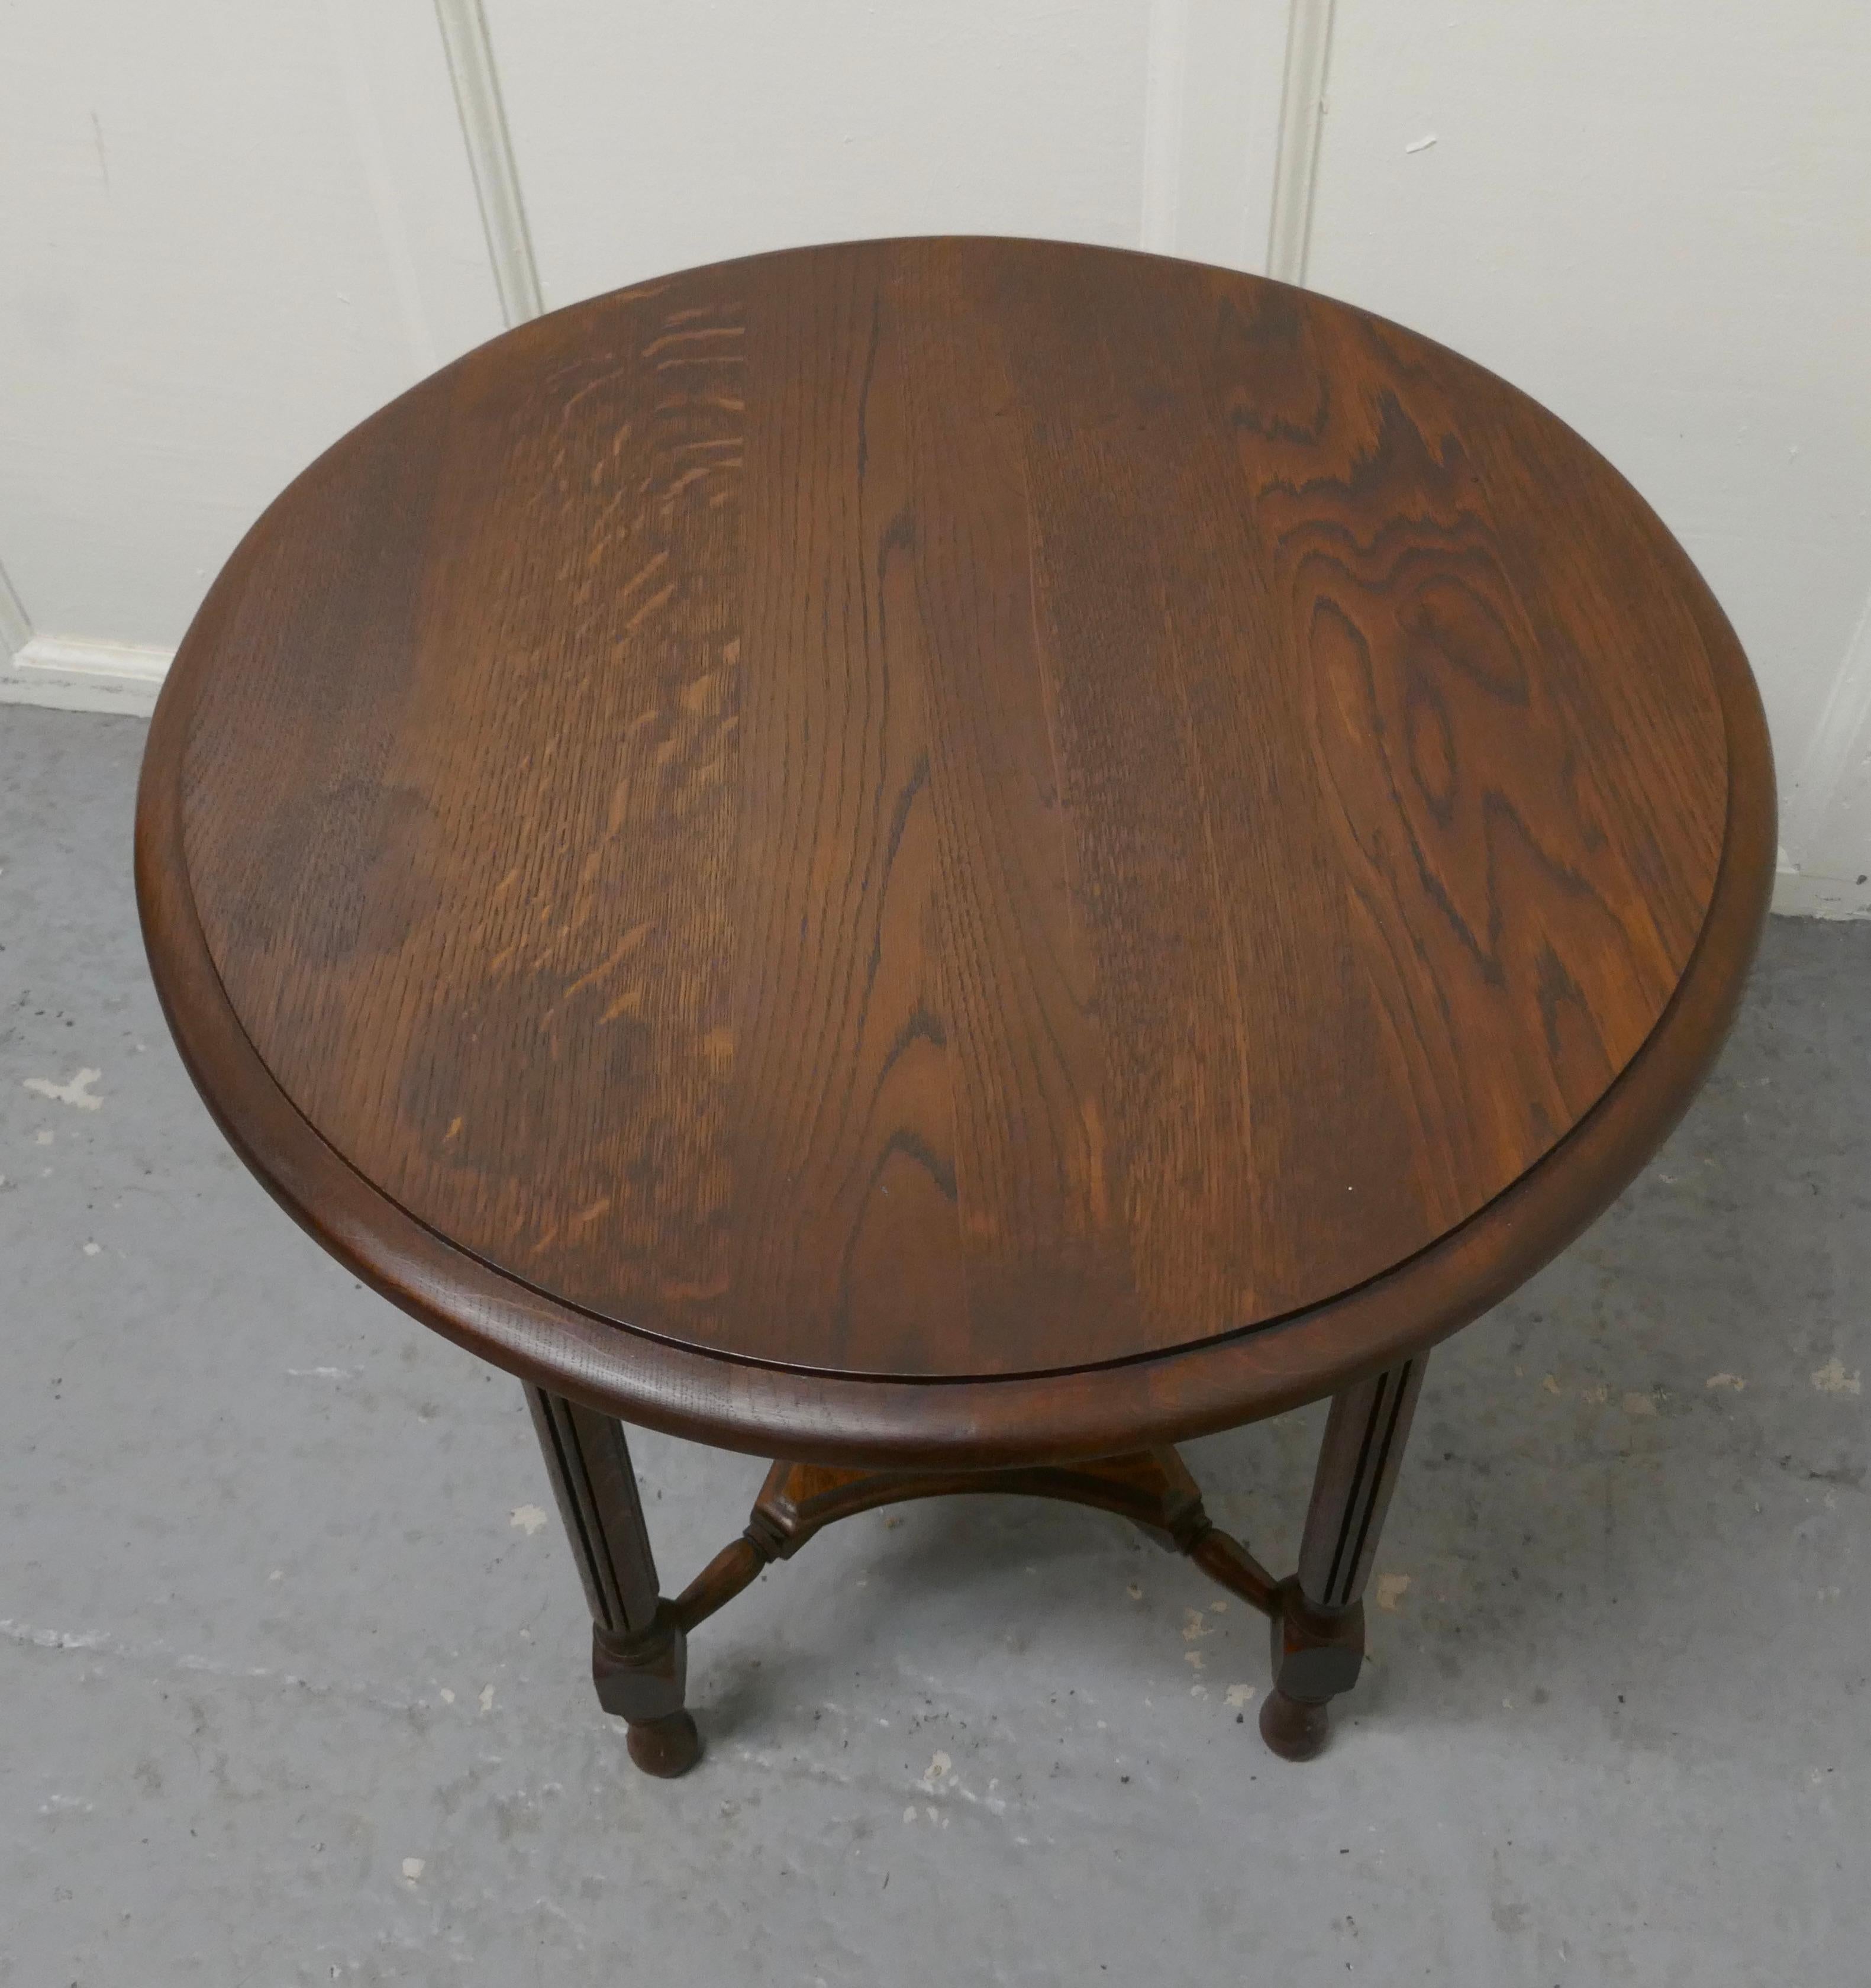 Round oak occasional table, with undertier

This useful little table has two tiers, the top is round with a deep moulded edge, and it is set on elegant fluted and turned legs

This is a very attractive piece, it 1s in good condition for its age